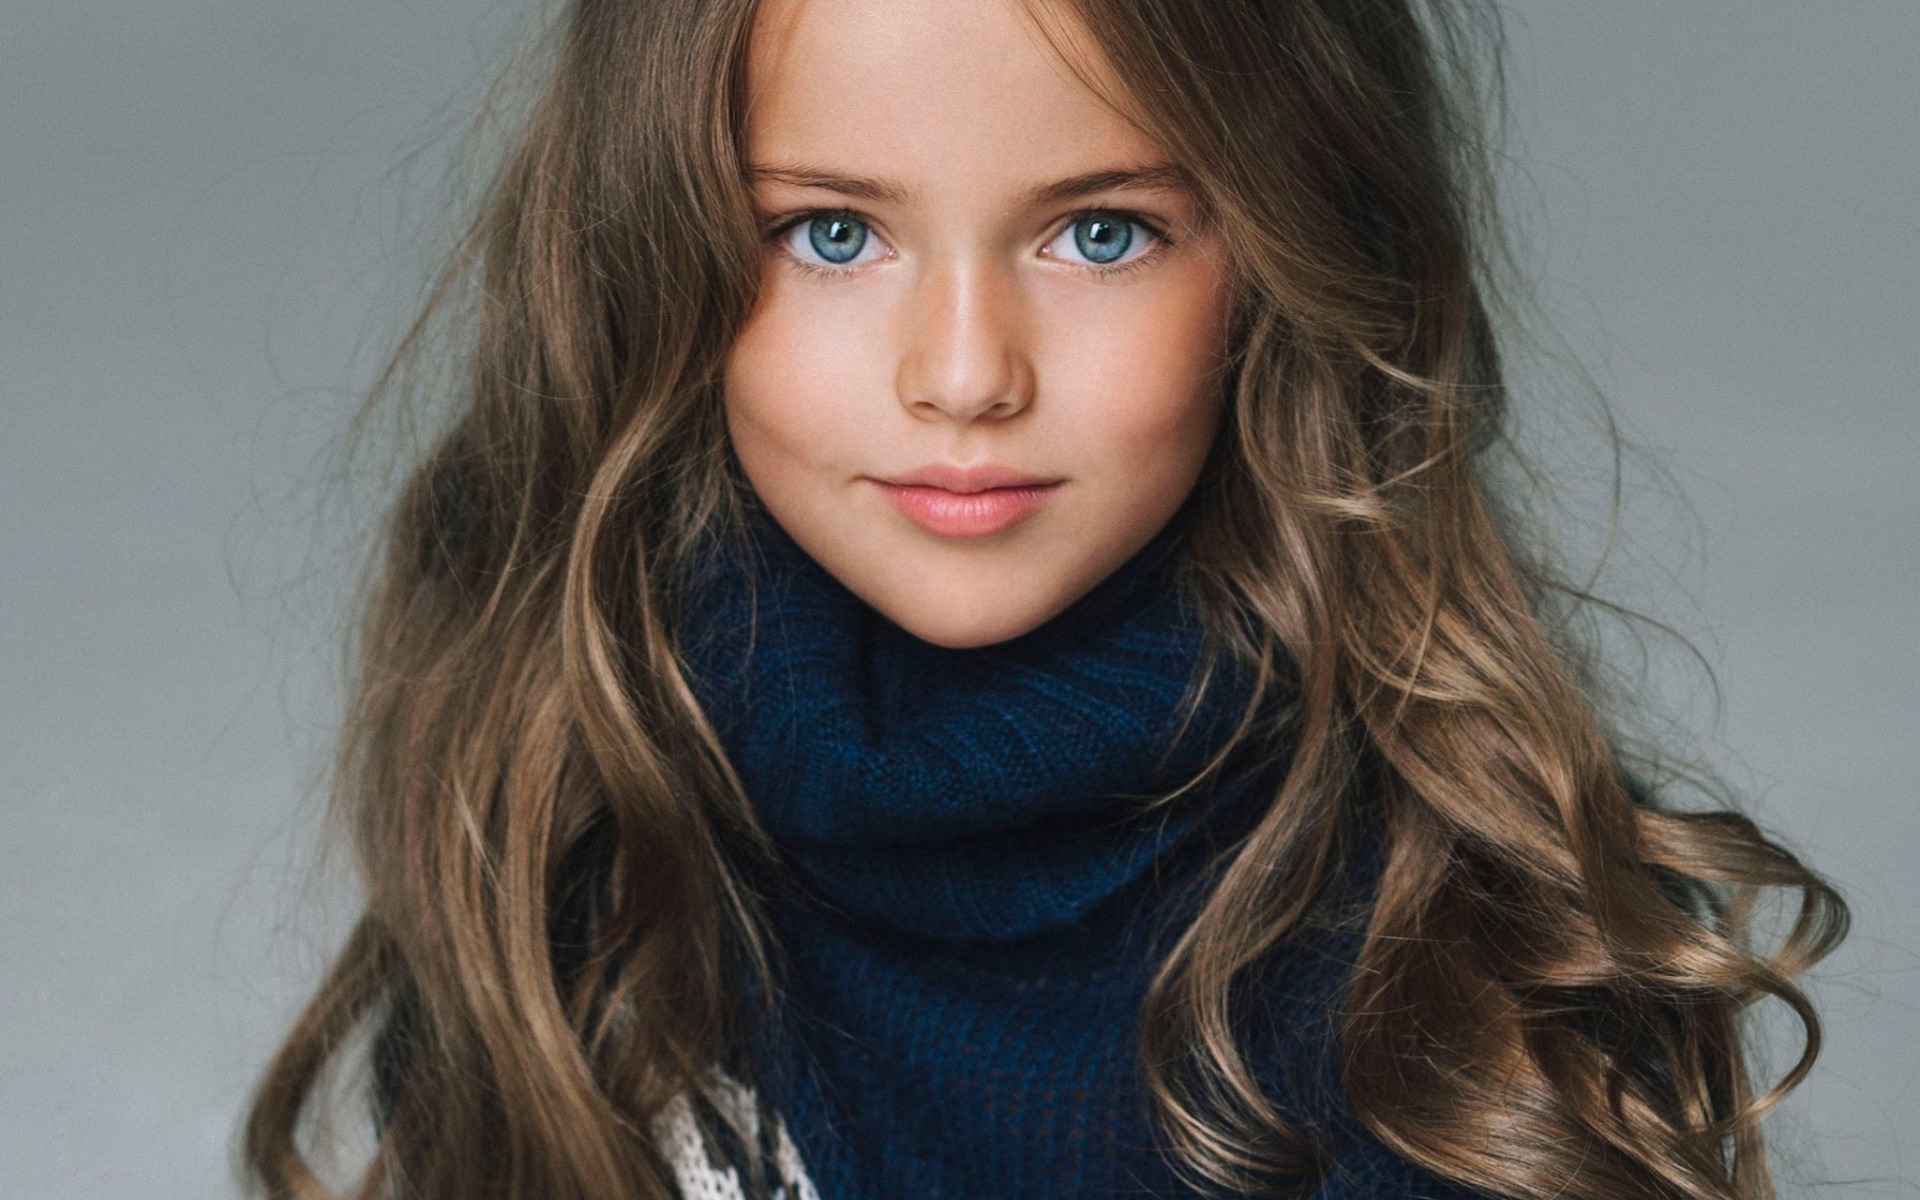 Little girl models young 8